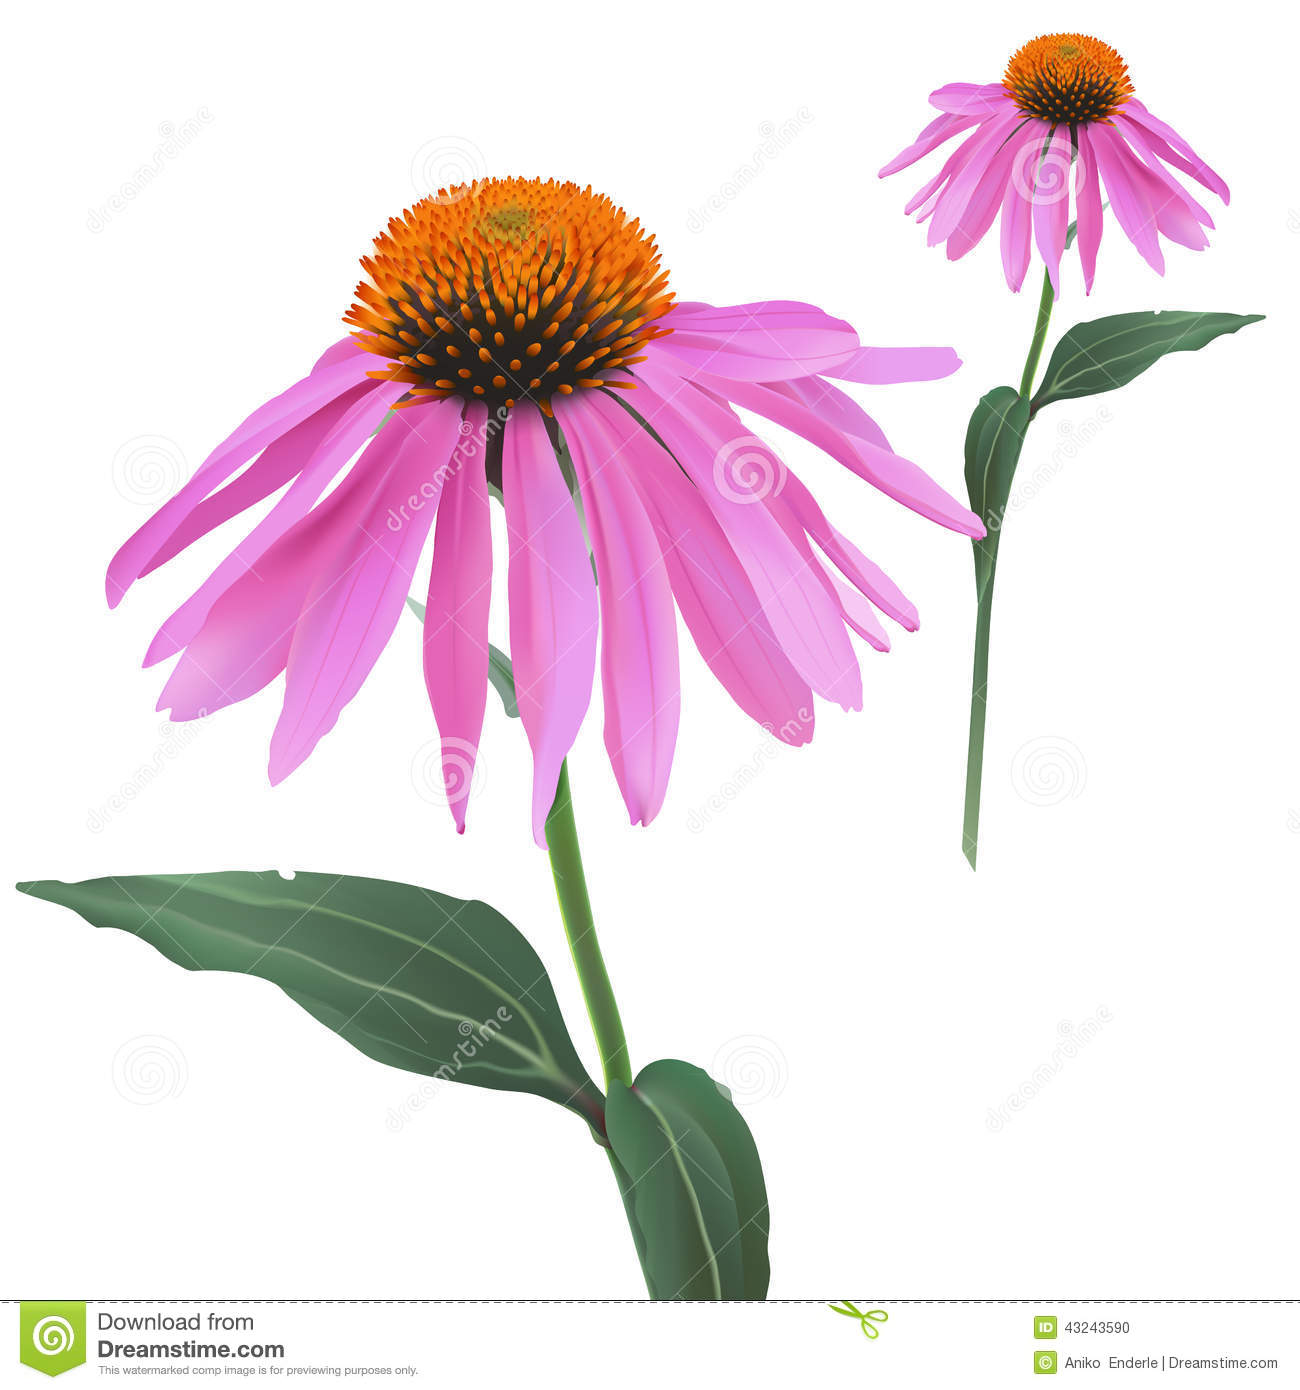 Cone Flower clipart #7, Download drawings